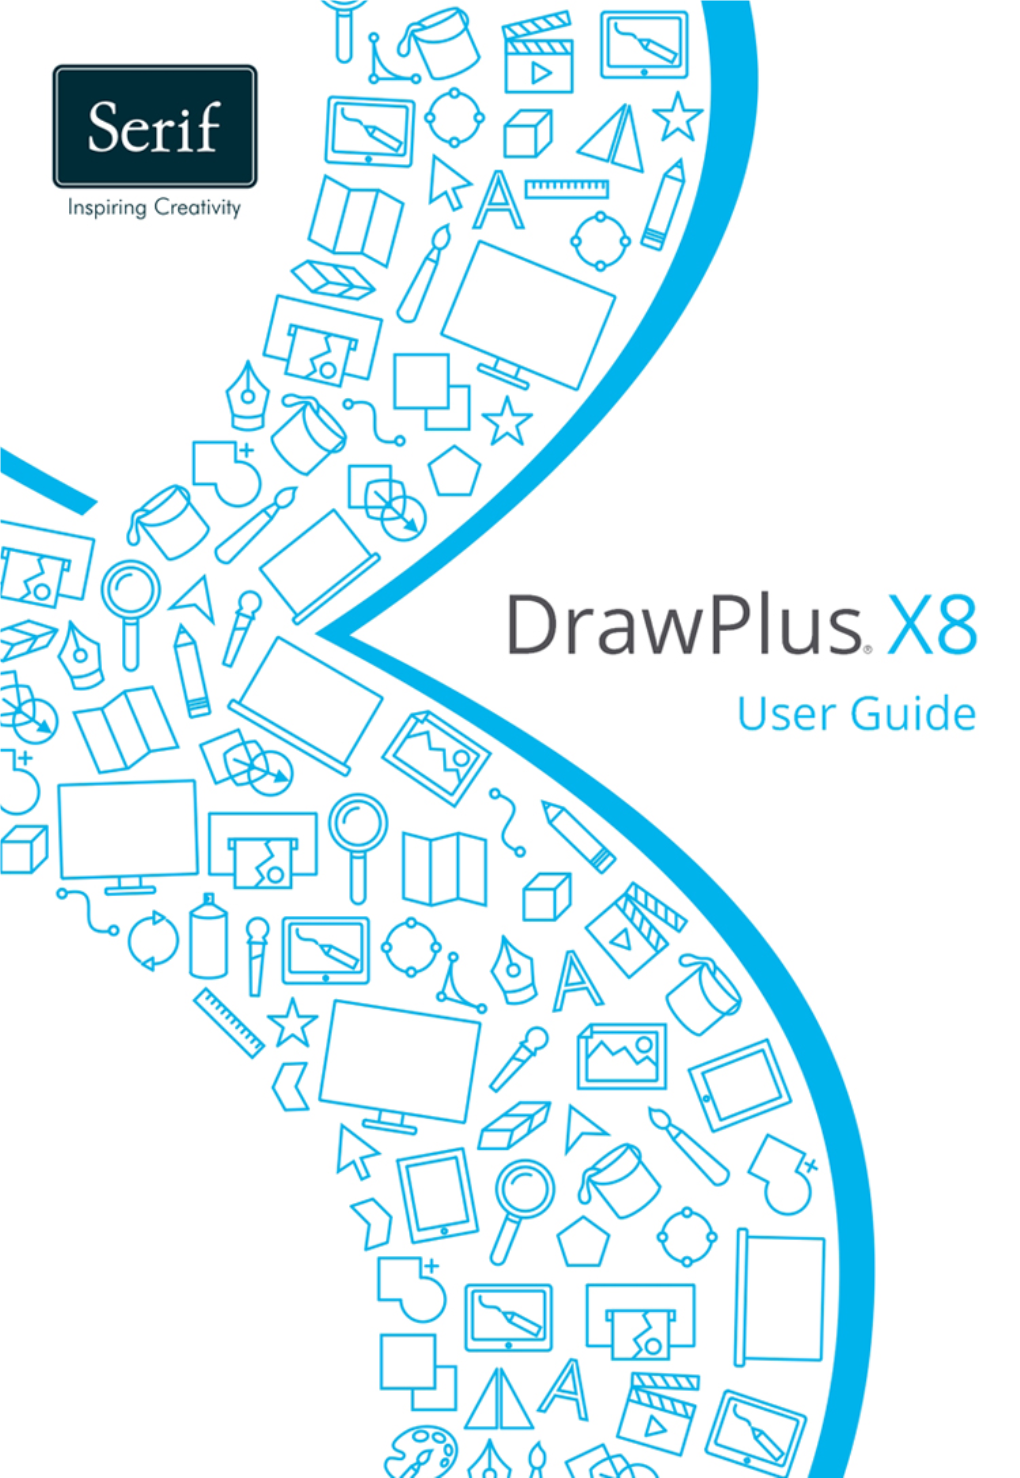 Drawplus X8 User Guide Are Also Provided